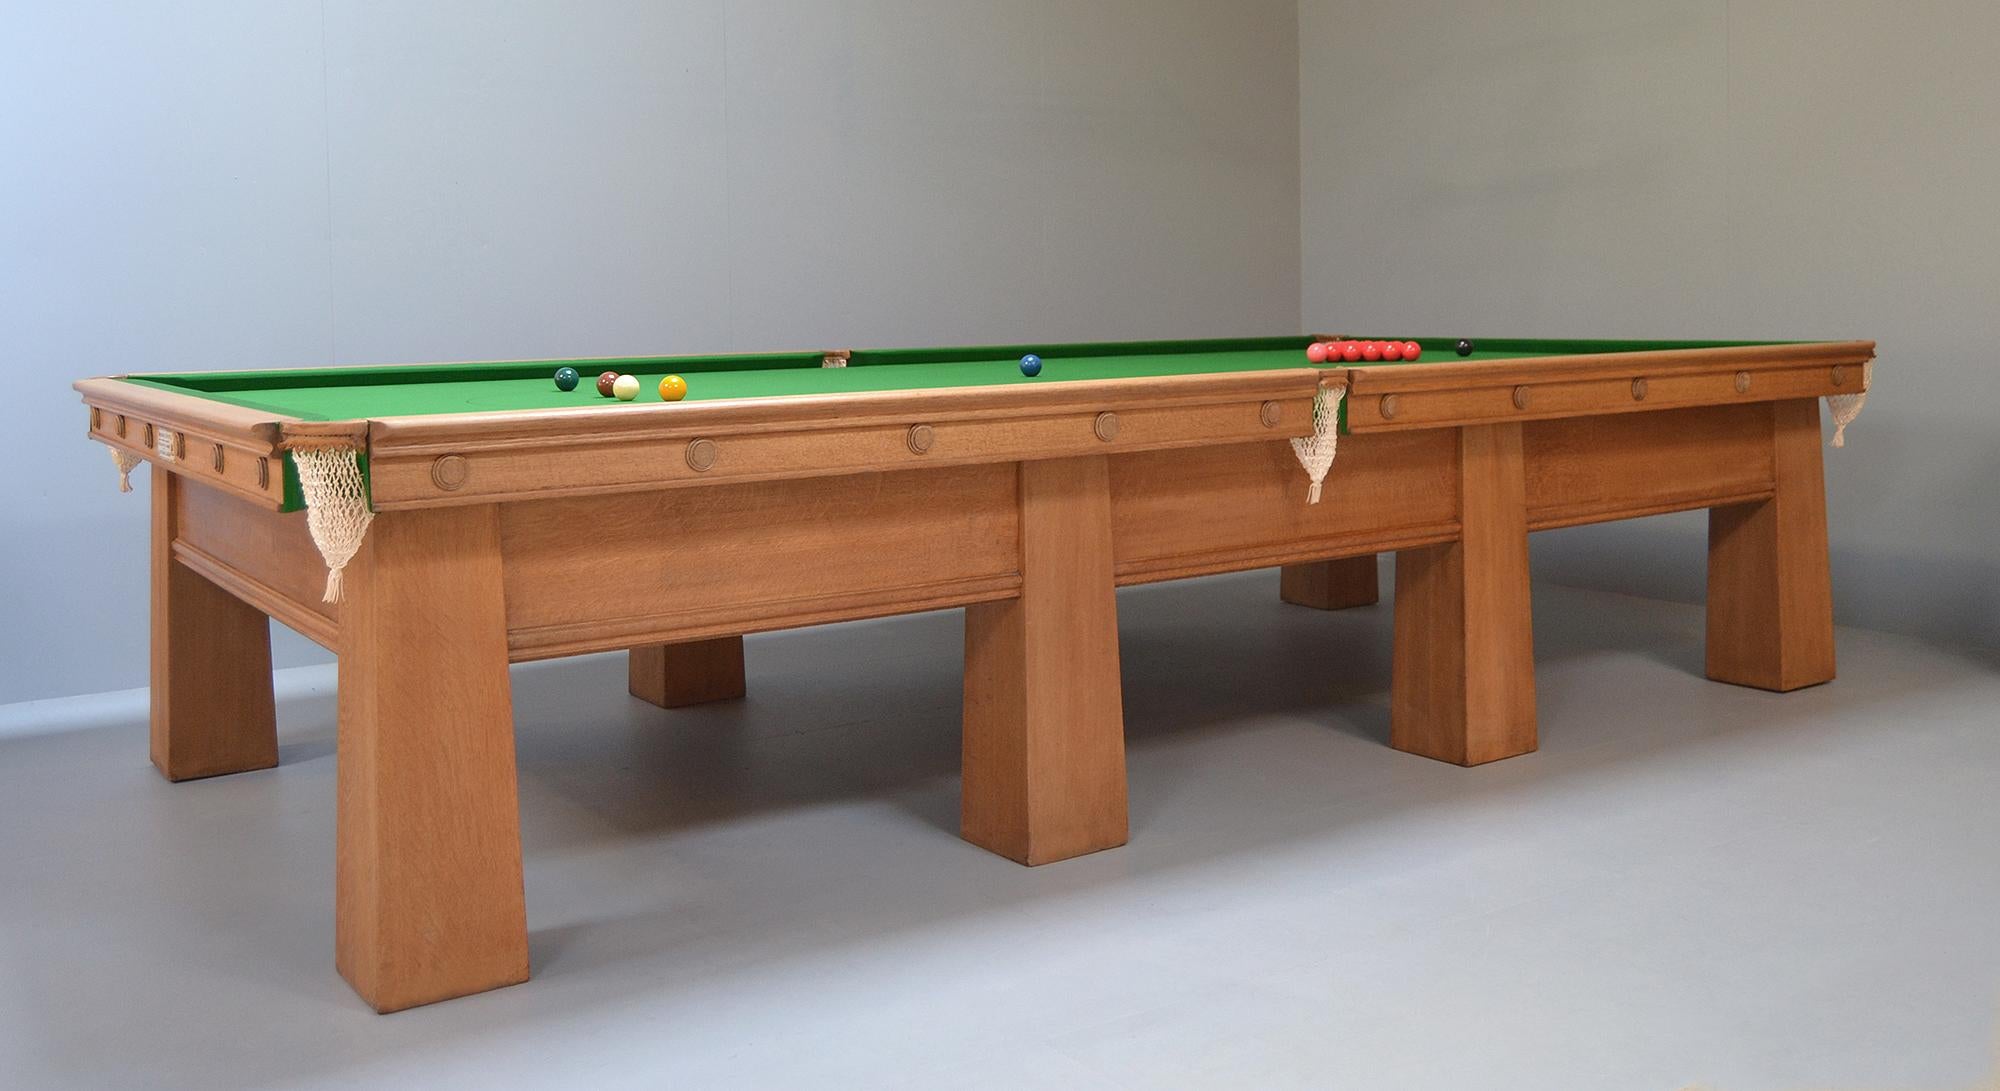 A wonderful Arts & Crafts billiard or snooker table in solid oak by Burroughes & Watts of London, this beautiful table has great presence.

Standing on eight gargantuan tapering legs, all of the frame fixings are internal so the line of the leg is